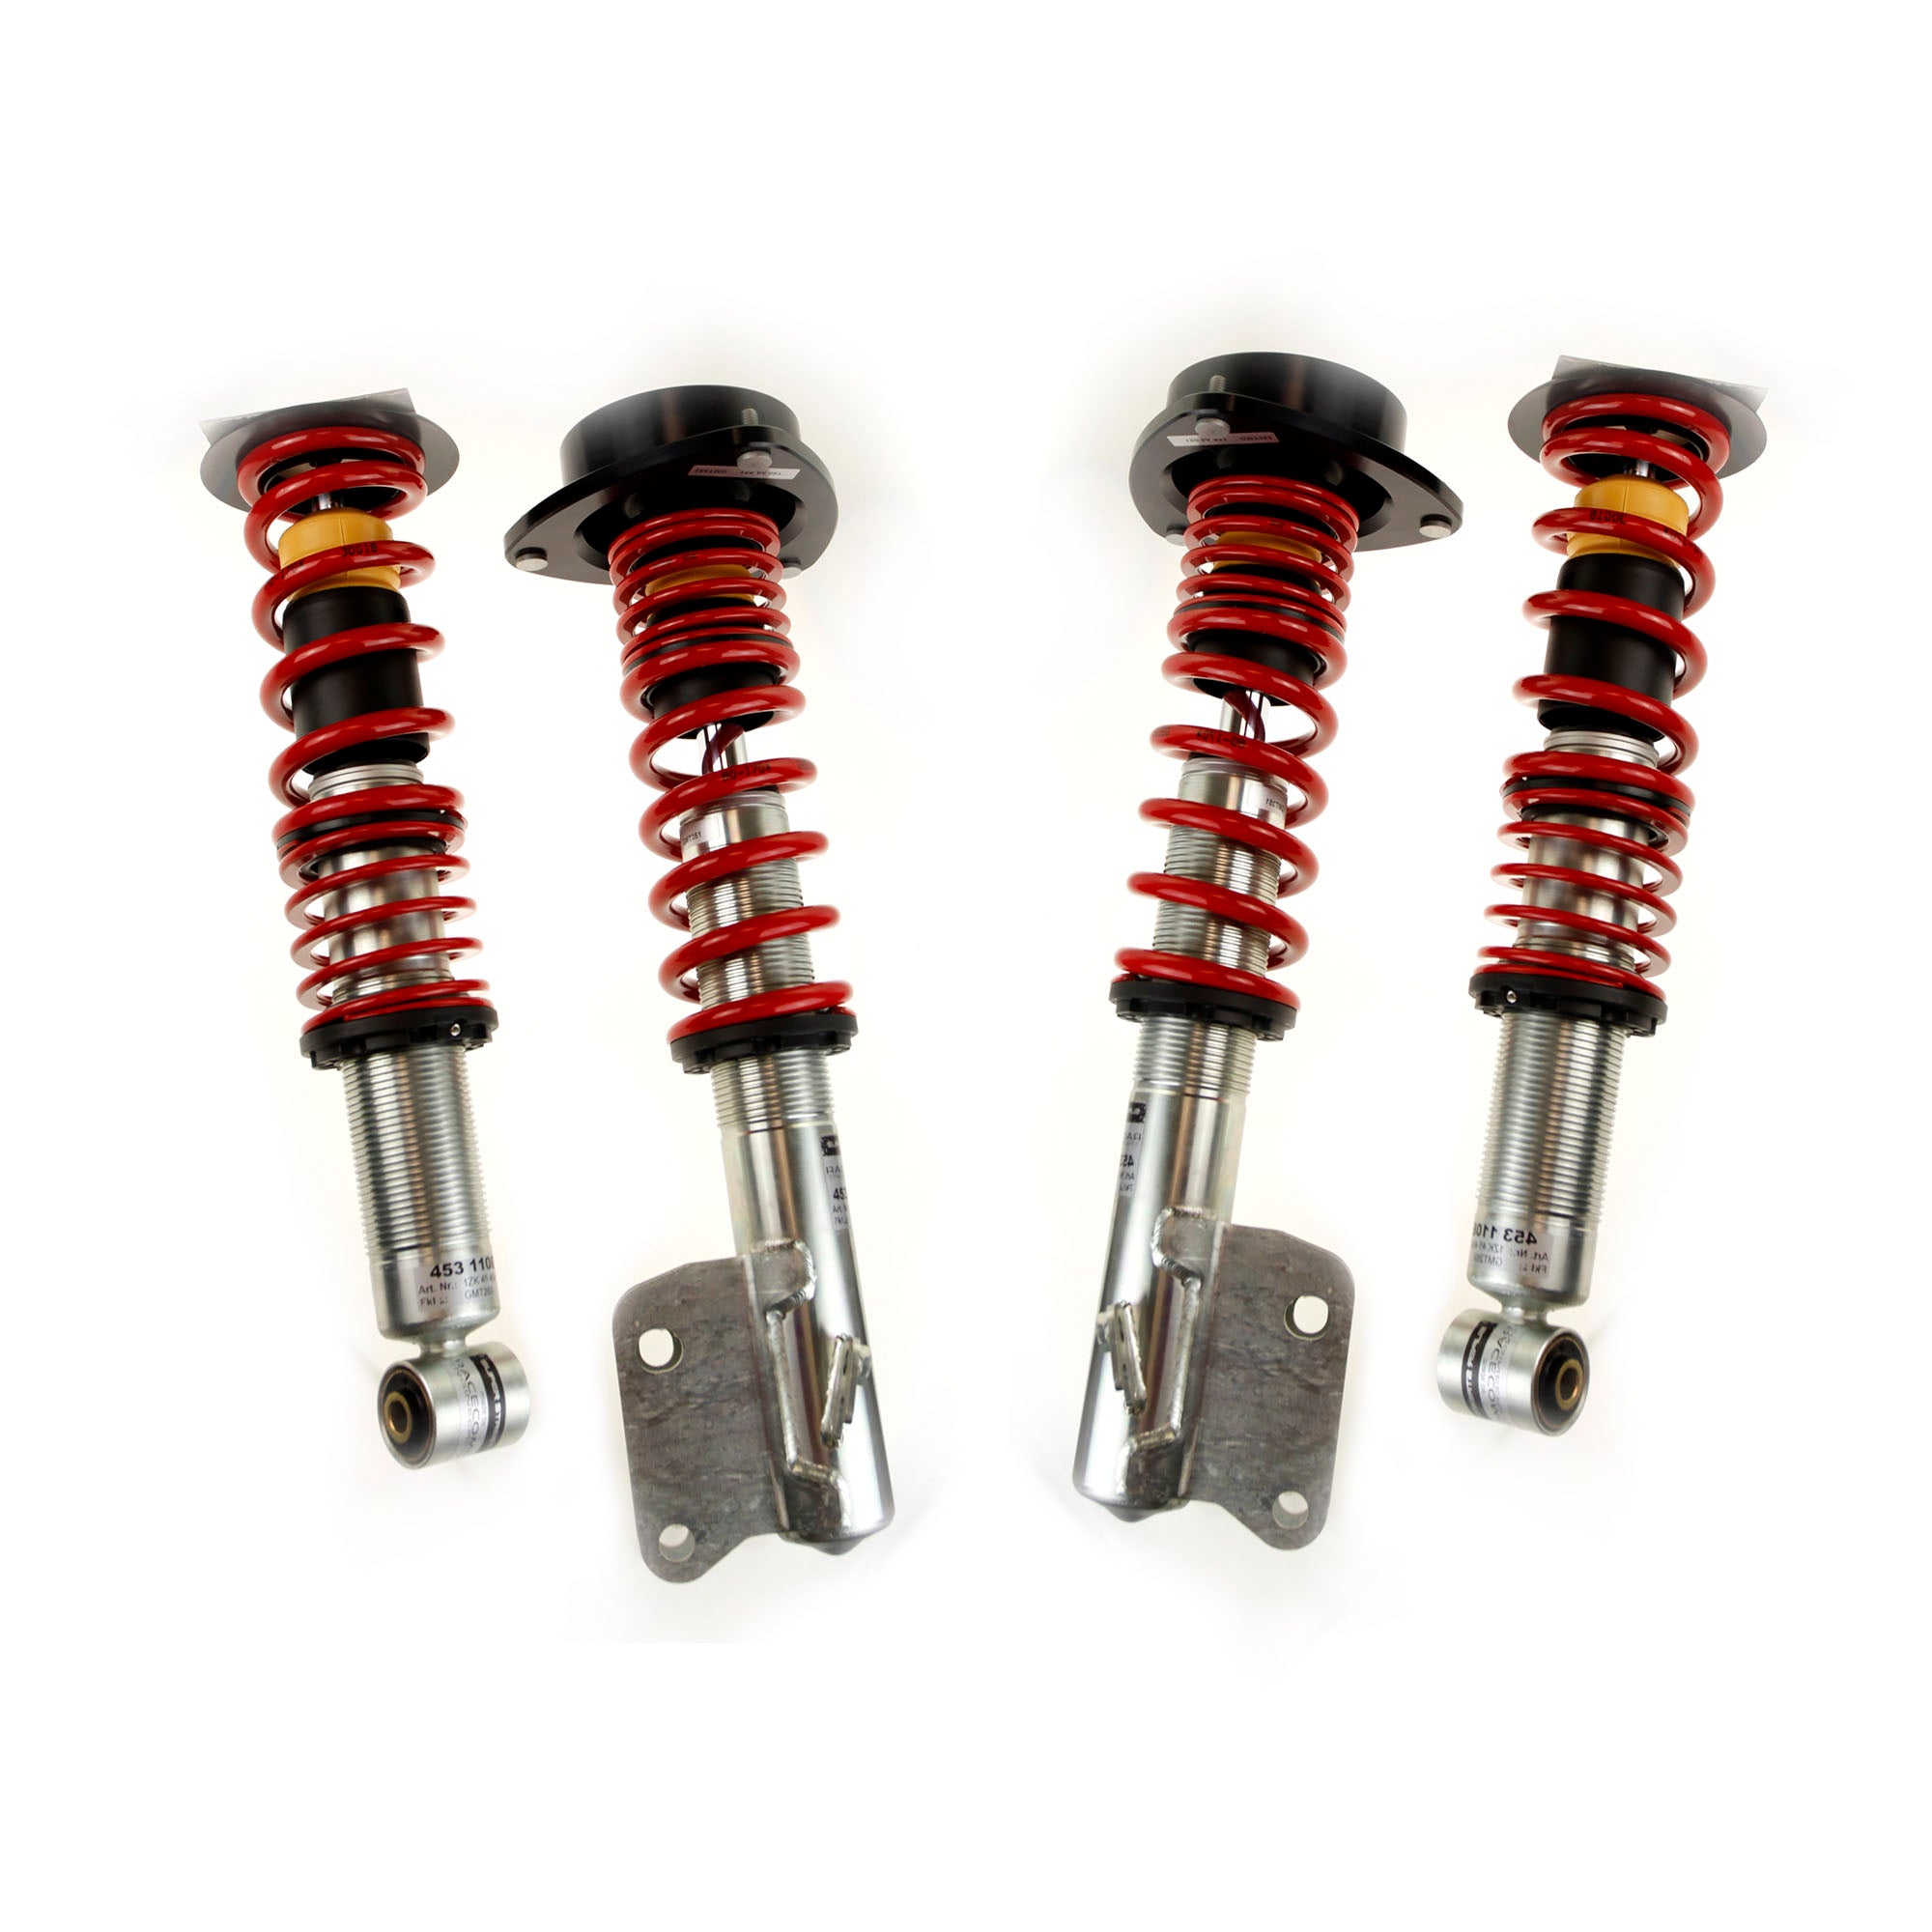 Racecomp Engineering Superstreet-1 Coilovers 2015-2021 WRX/STI